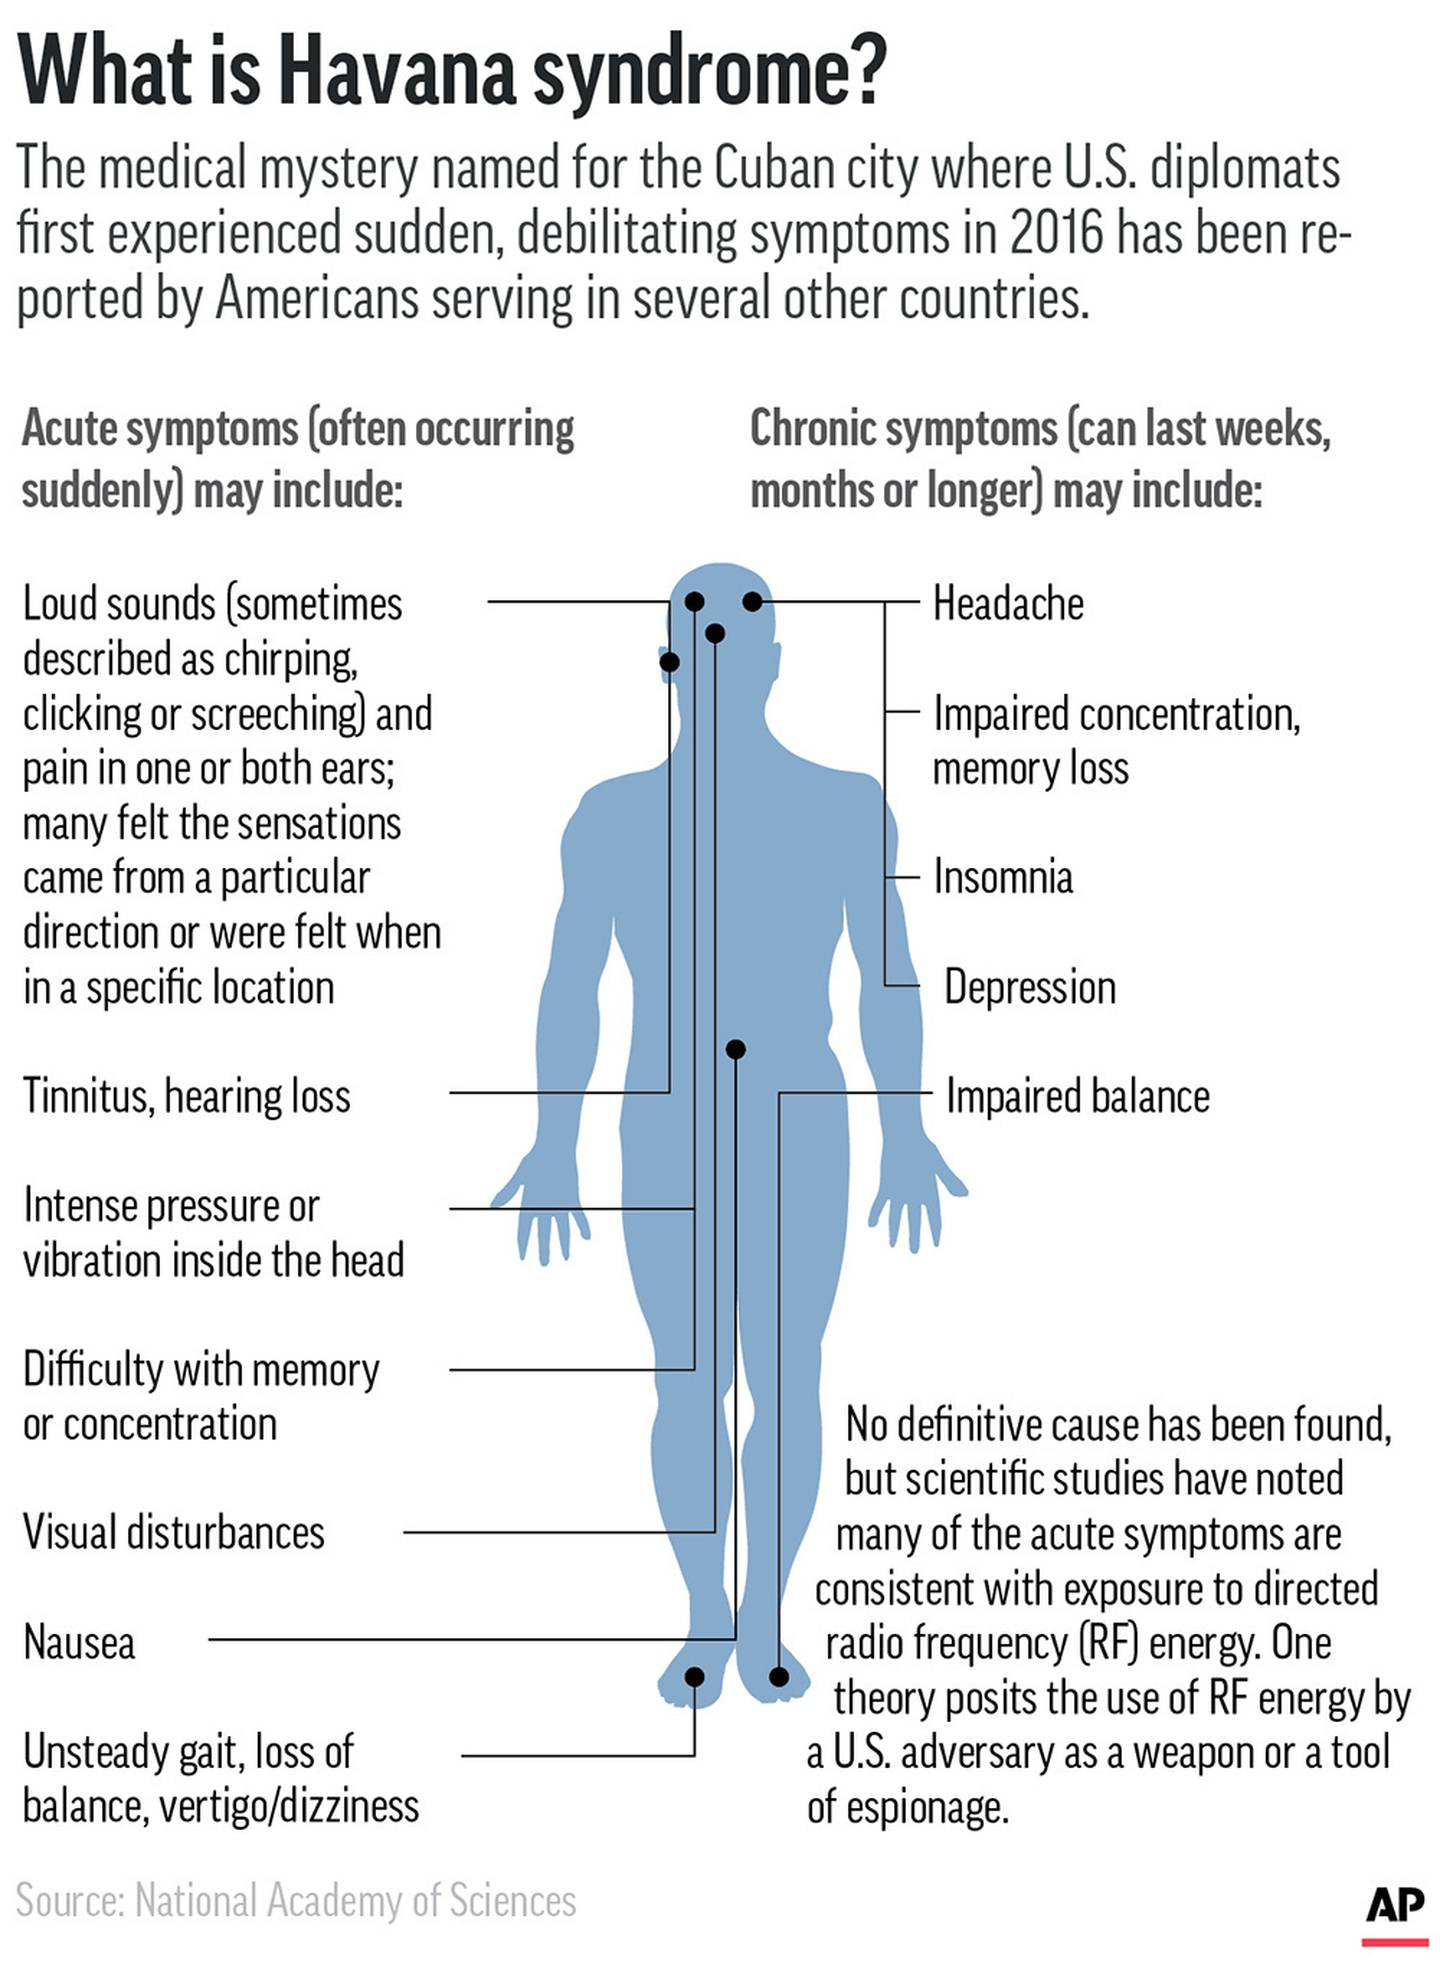 Symptoms associated with Havana syndrome, which has afflicted Americans serving at diplomatic posts in several countries. AP Graphic